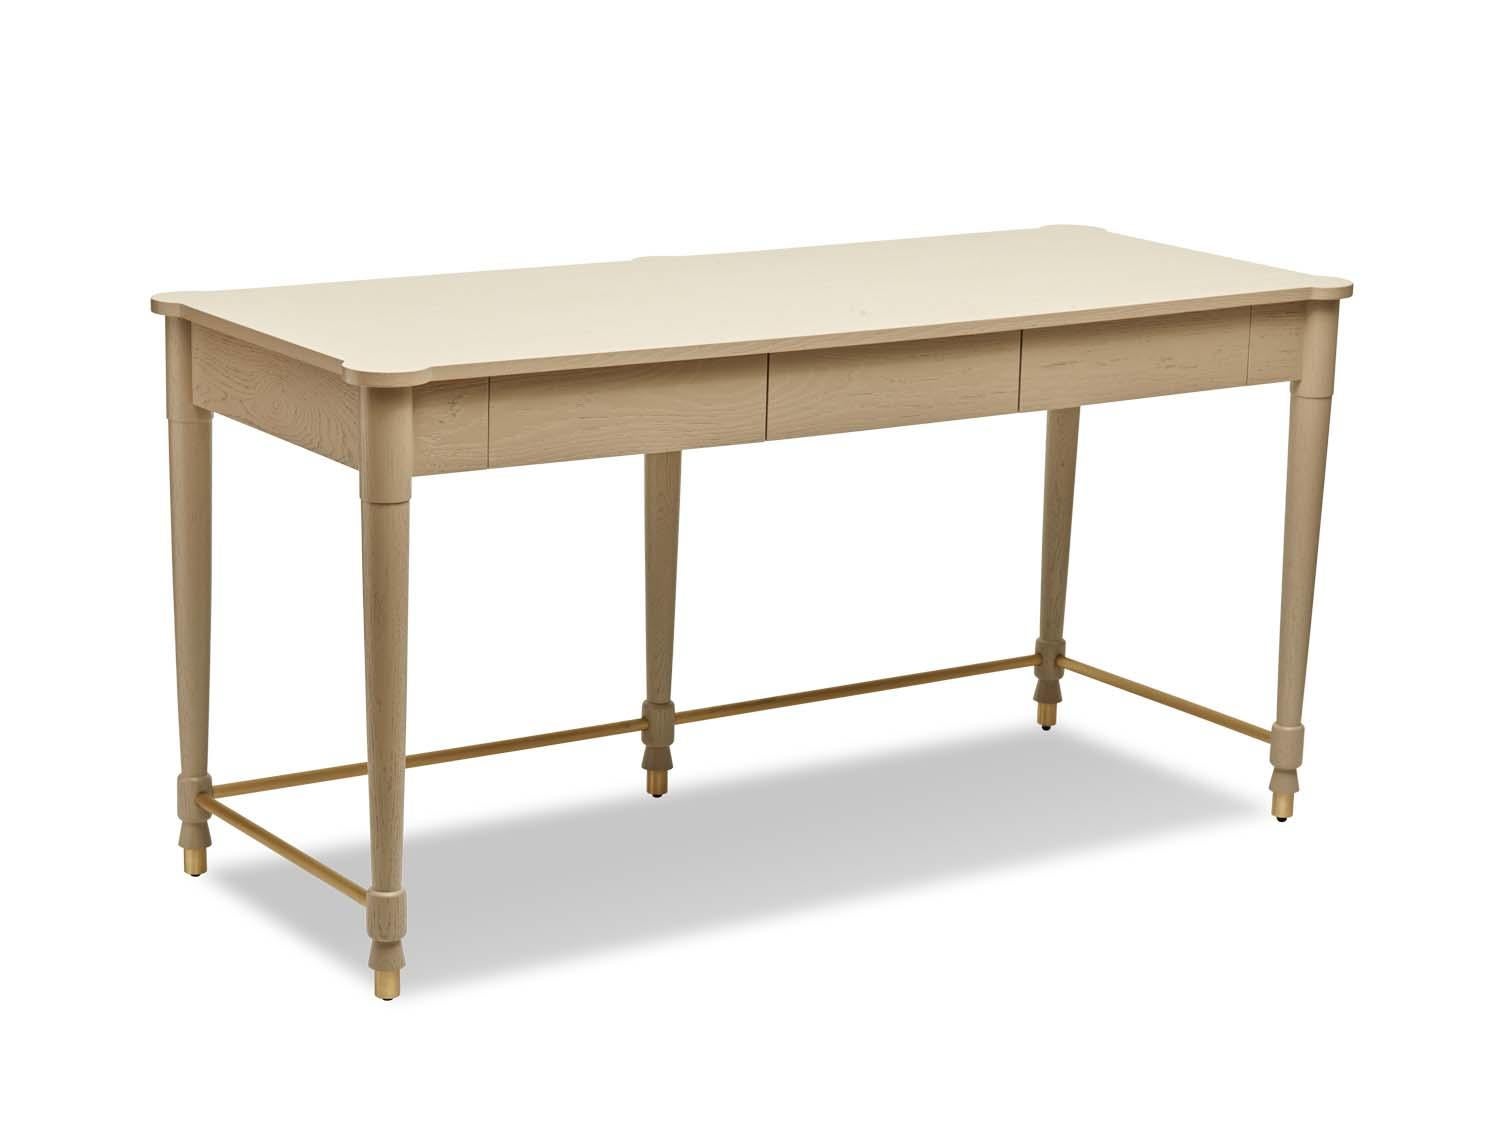 The Niguel desk features brass cap feet and a brass cross-stretcher with lacquered interior drawers. 

The Lawson-Fenning Collection is designed and handmade in Los Angeles, California. Reach out to discover what options are currently in stock.
 